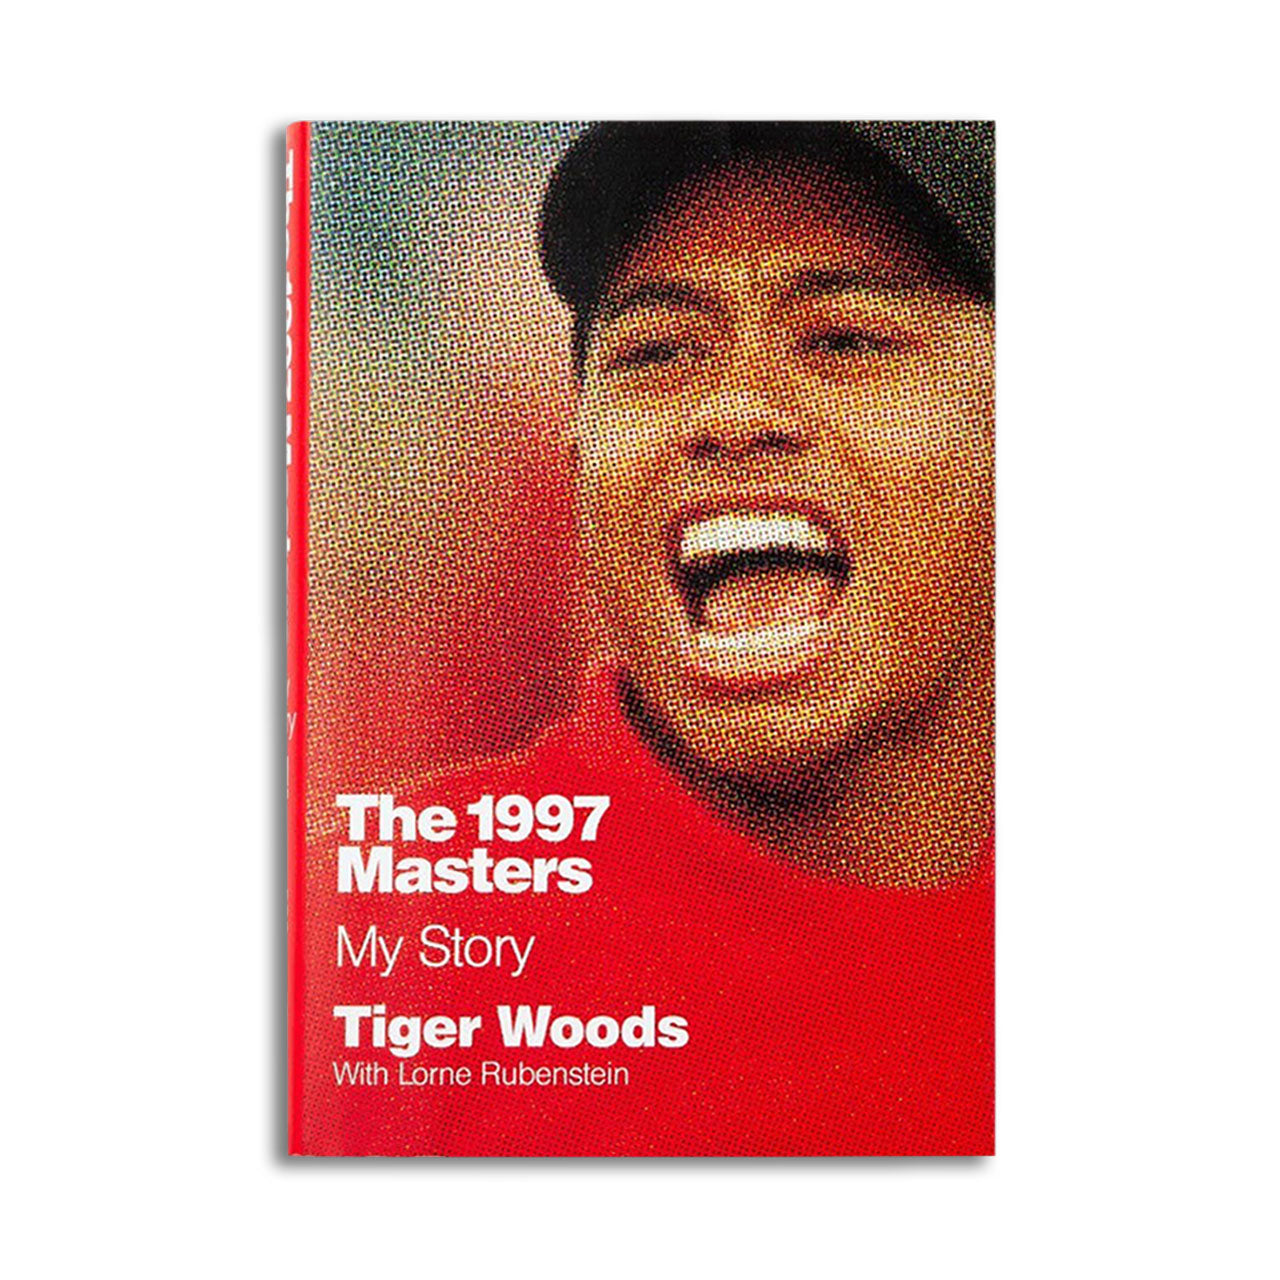 Tiger Woods 1997 Masters: My Story Autographed Book